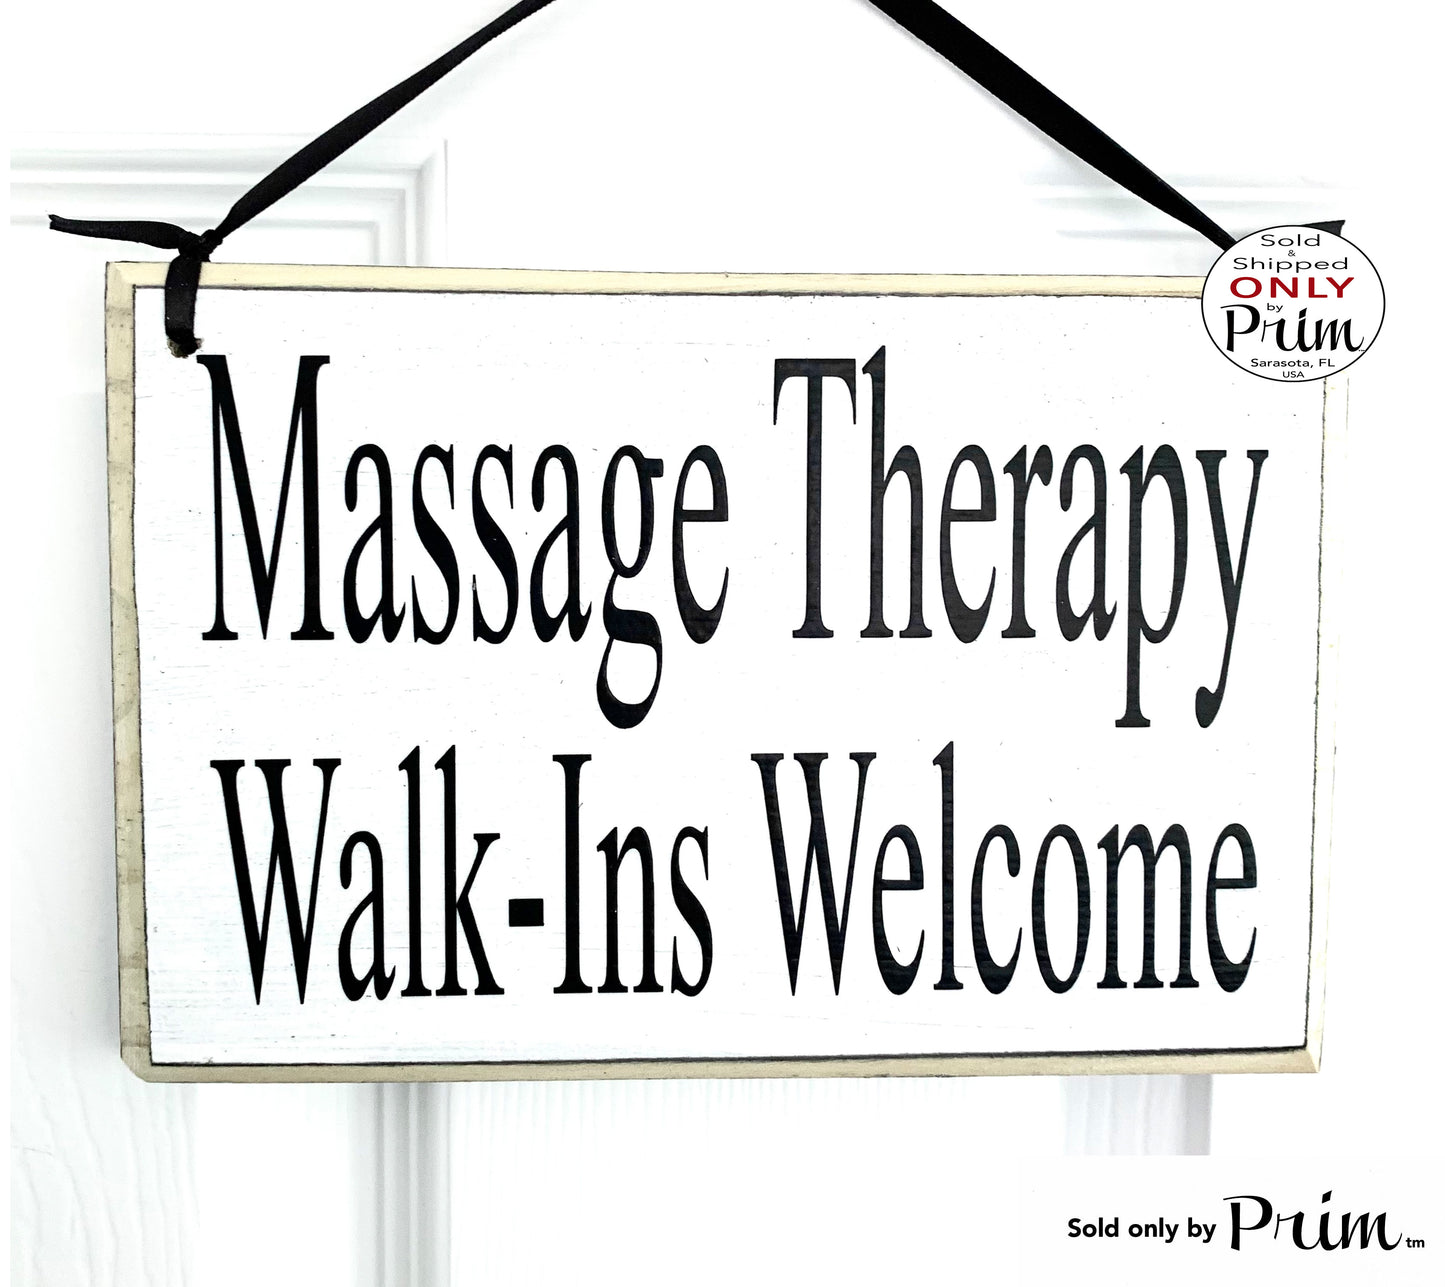 Designs by Prim 8x6 Massage Therapy Walk-Ins Welcome Custom Wood Sign | Office Business Salon Spa Therapy Clinic Massage Facial Welcome Door Hanger Plaque